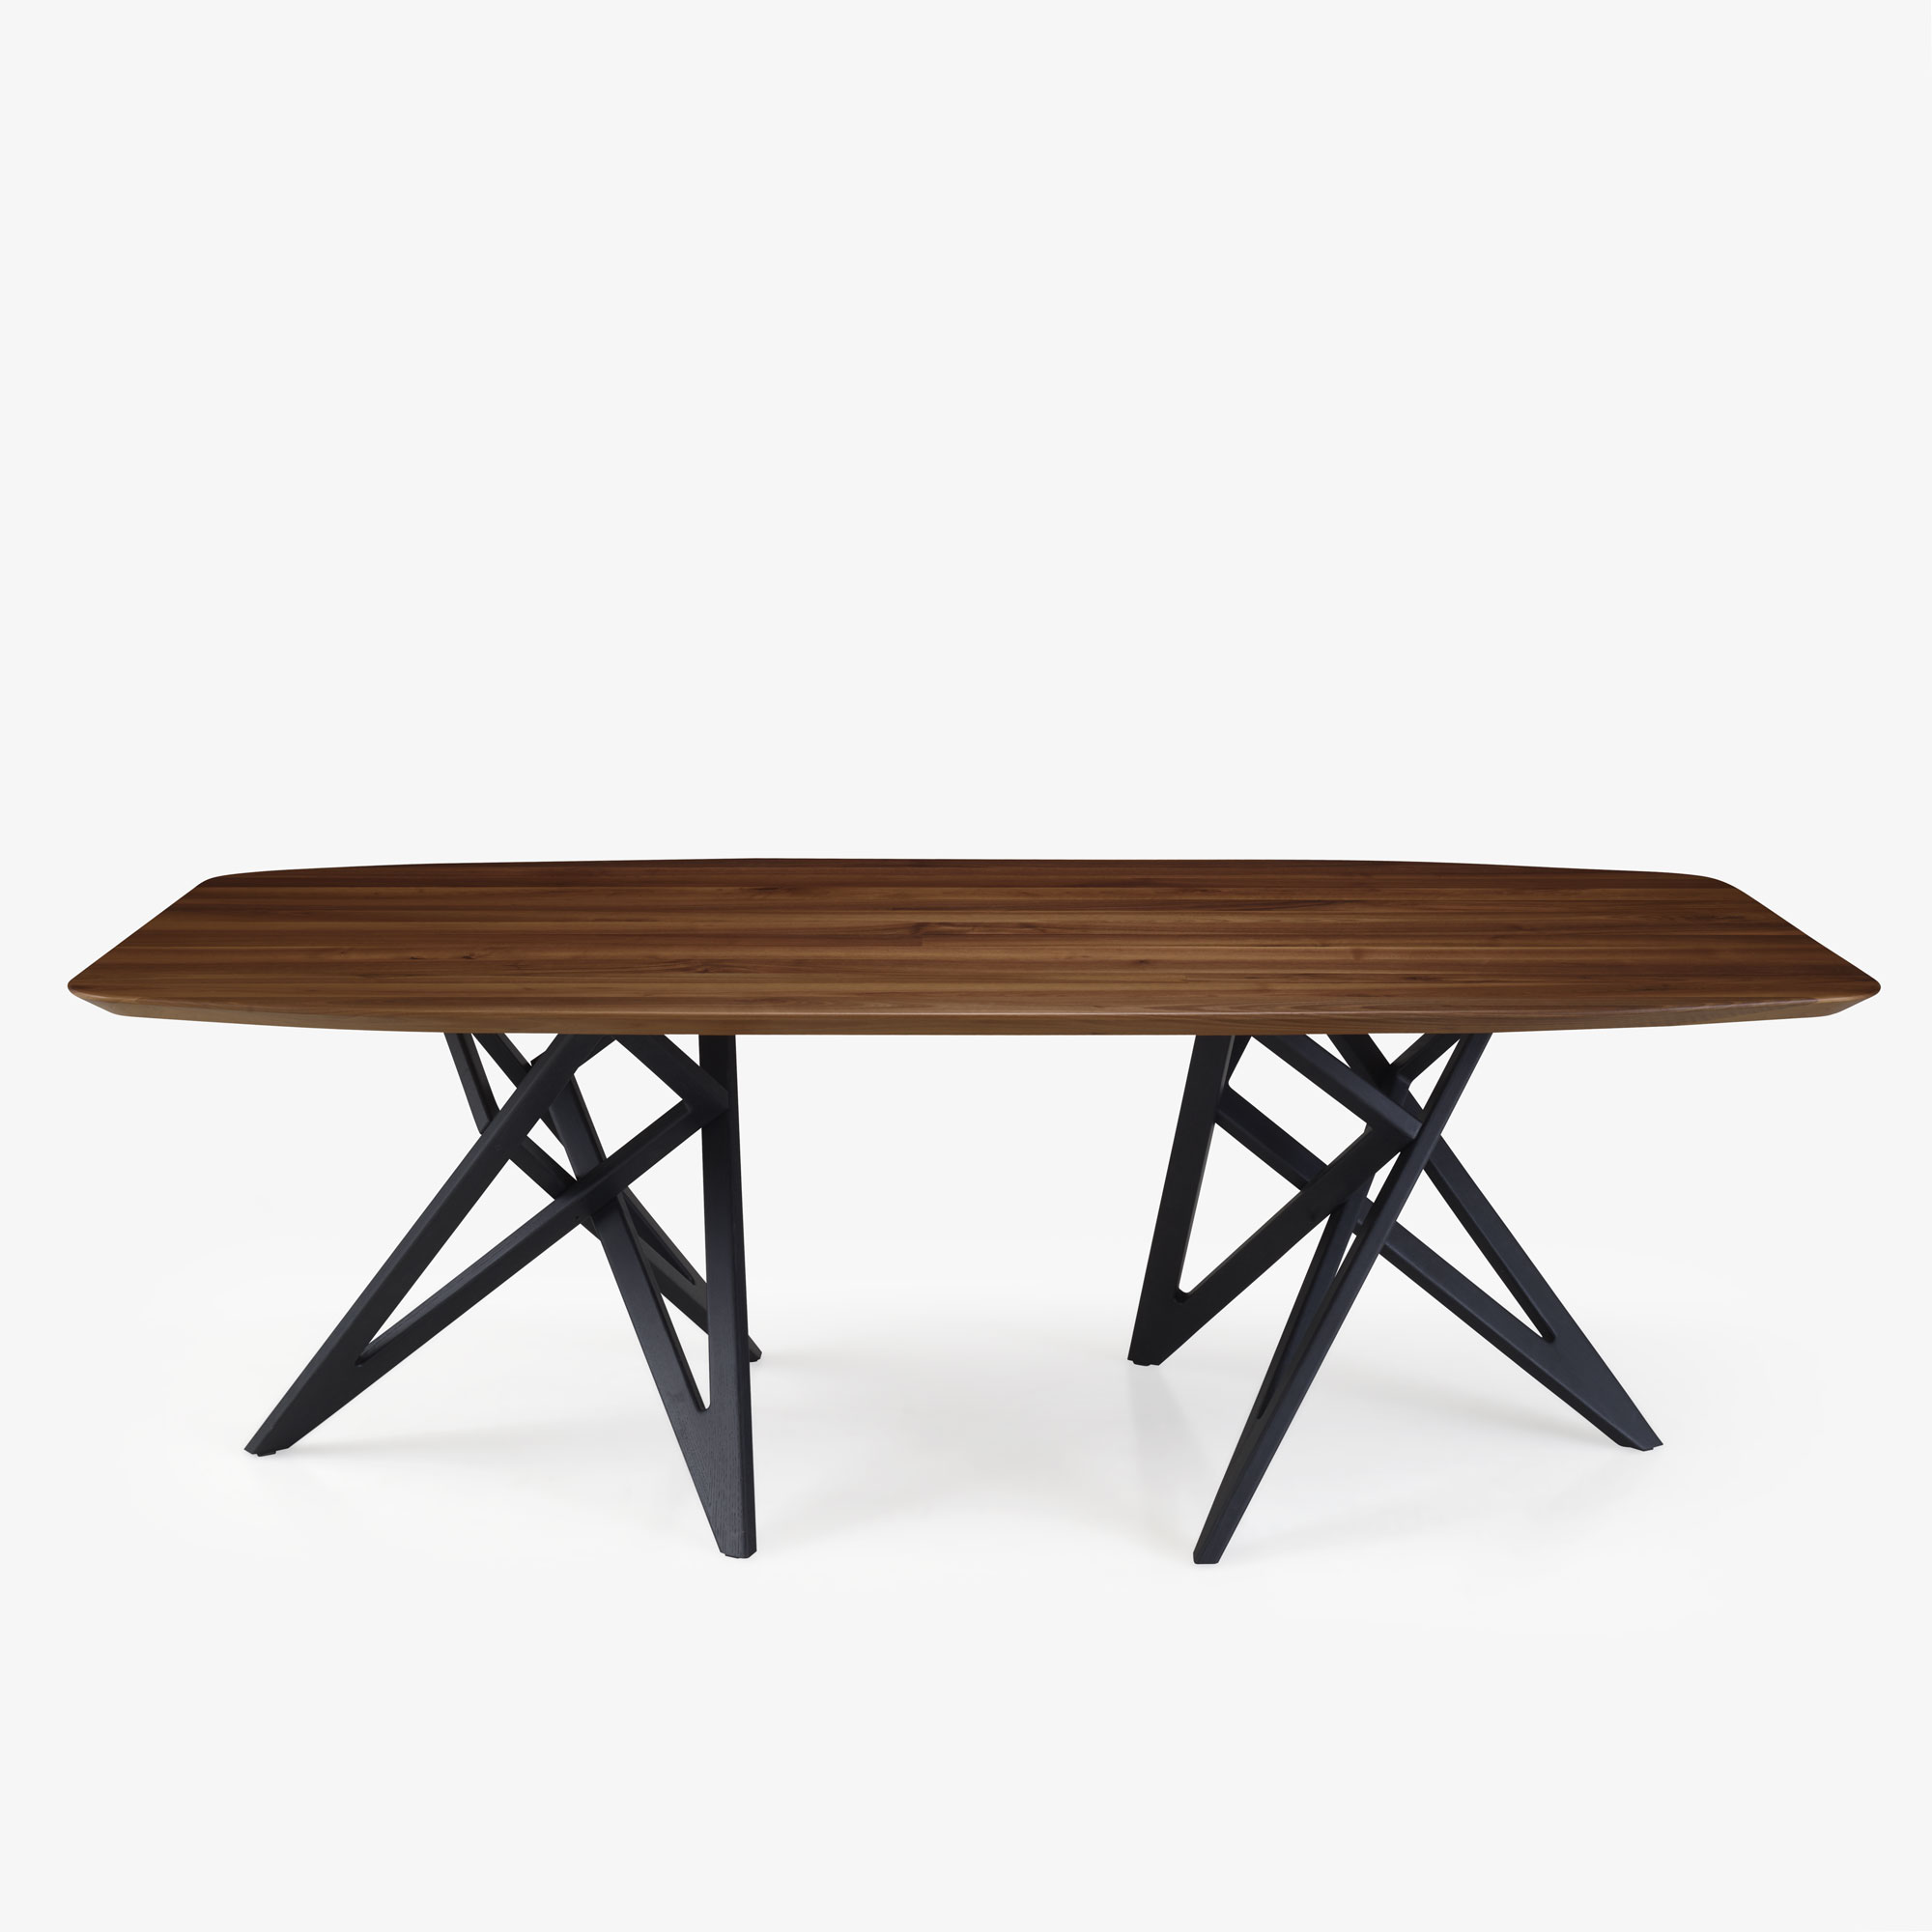 Image DINING TABLE – BARREL-SHAPED BASE IN BLACK STAINED ASH 